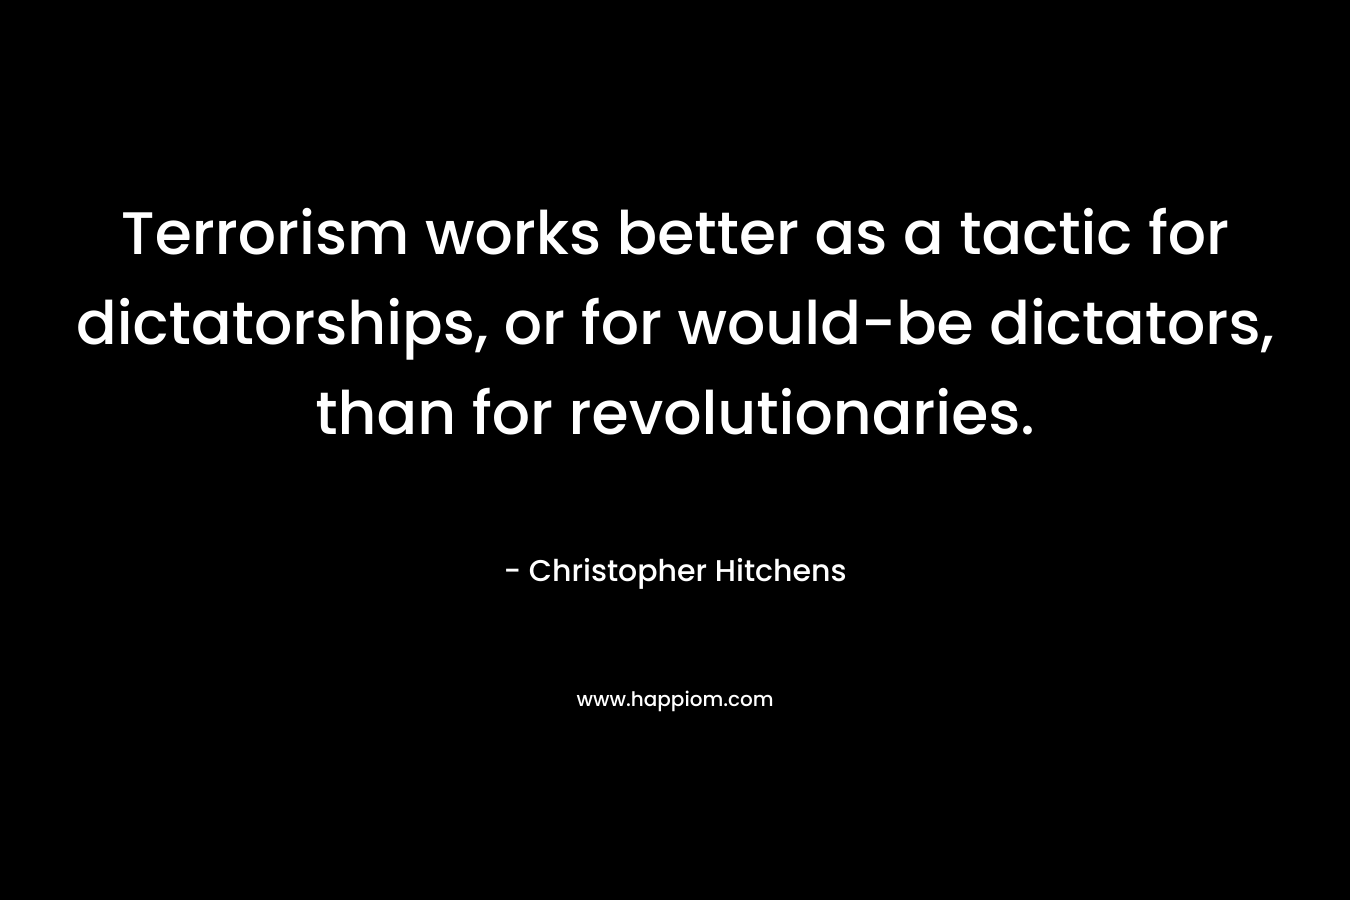 Terrorism works better as a tactic for dictatorships, or for would-be dictators, than for revolutionaries. – Christopher Hitchens